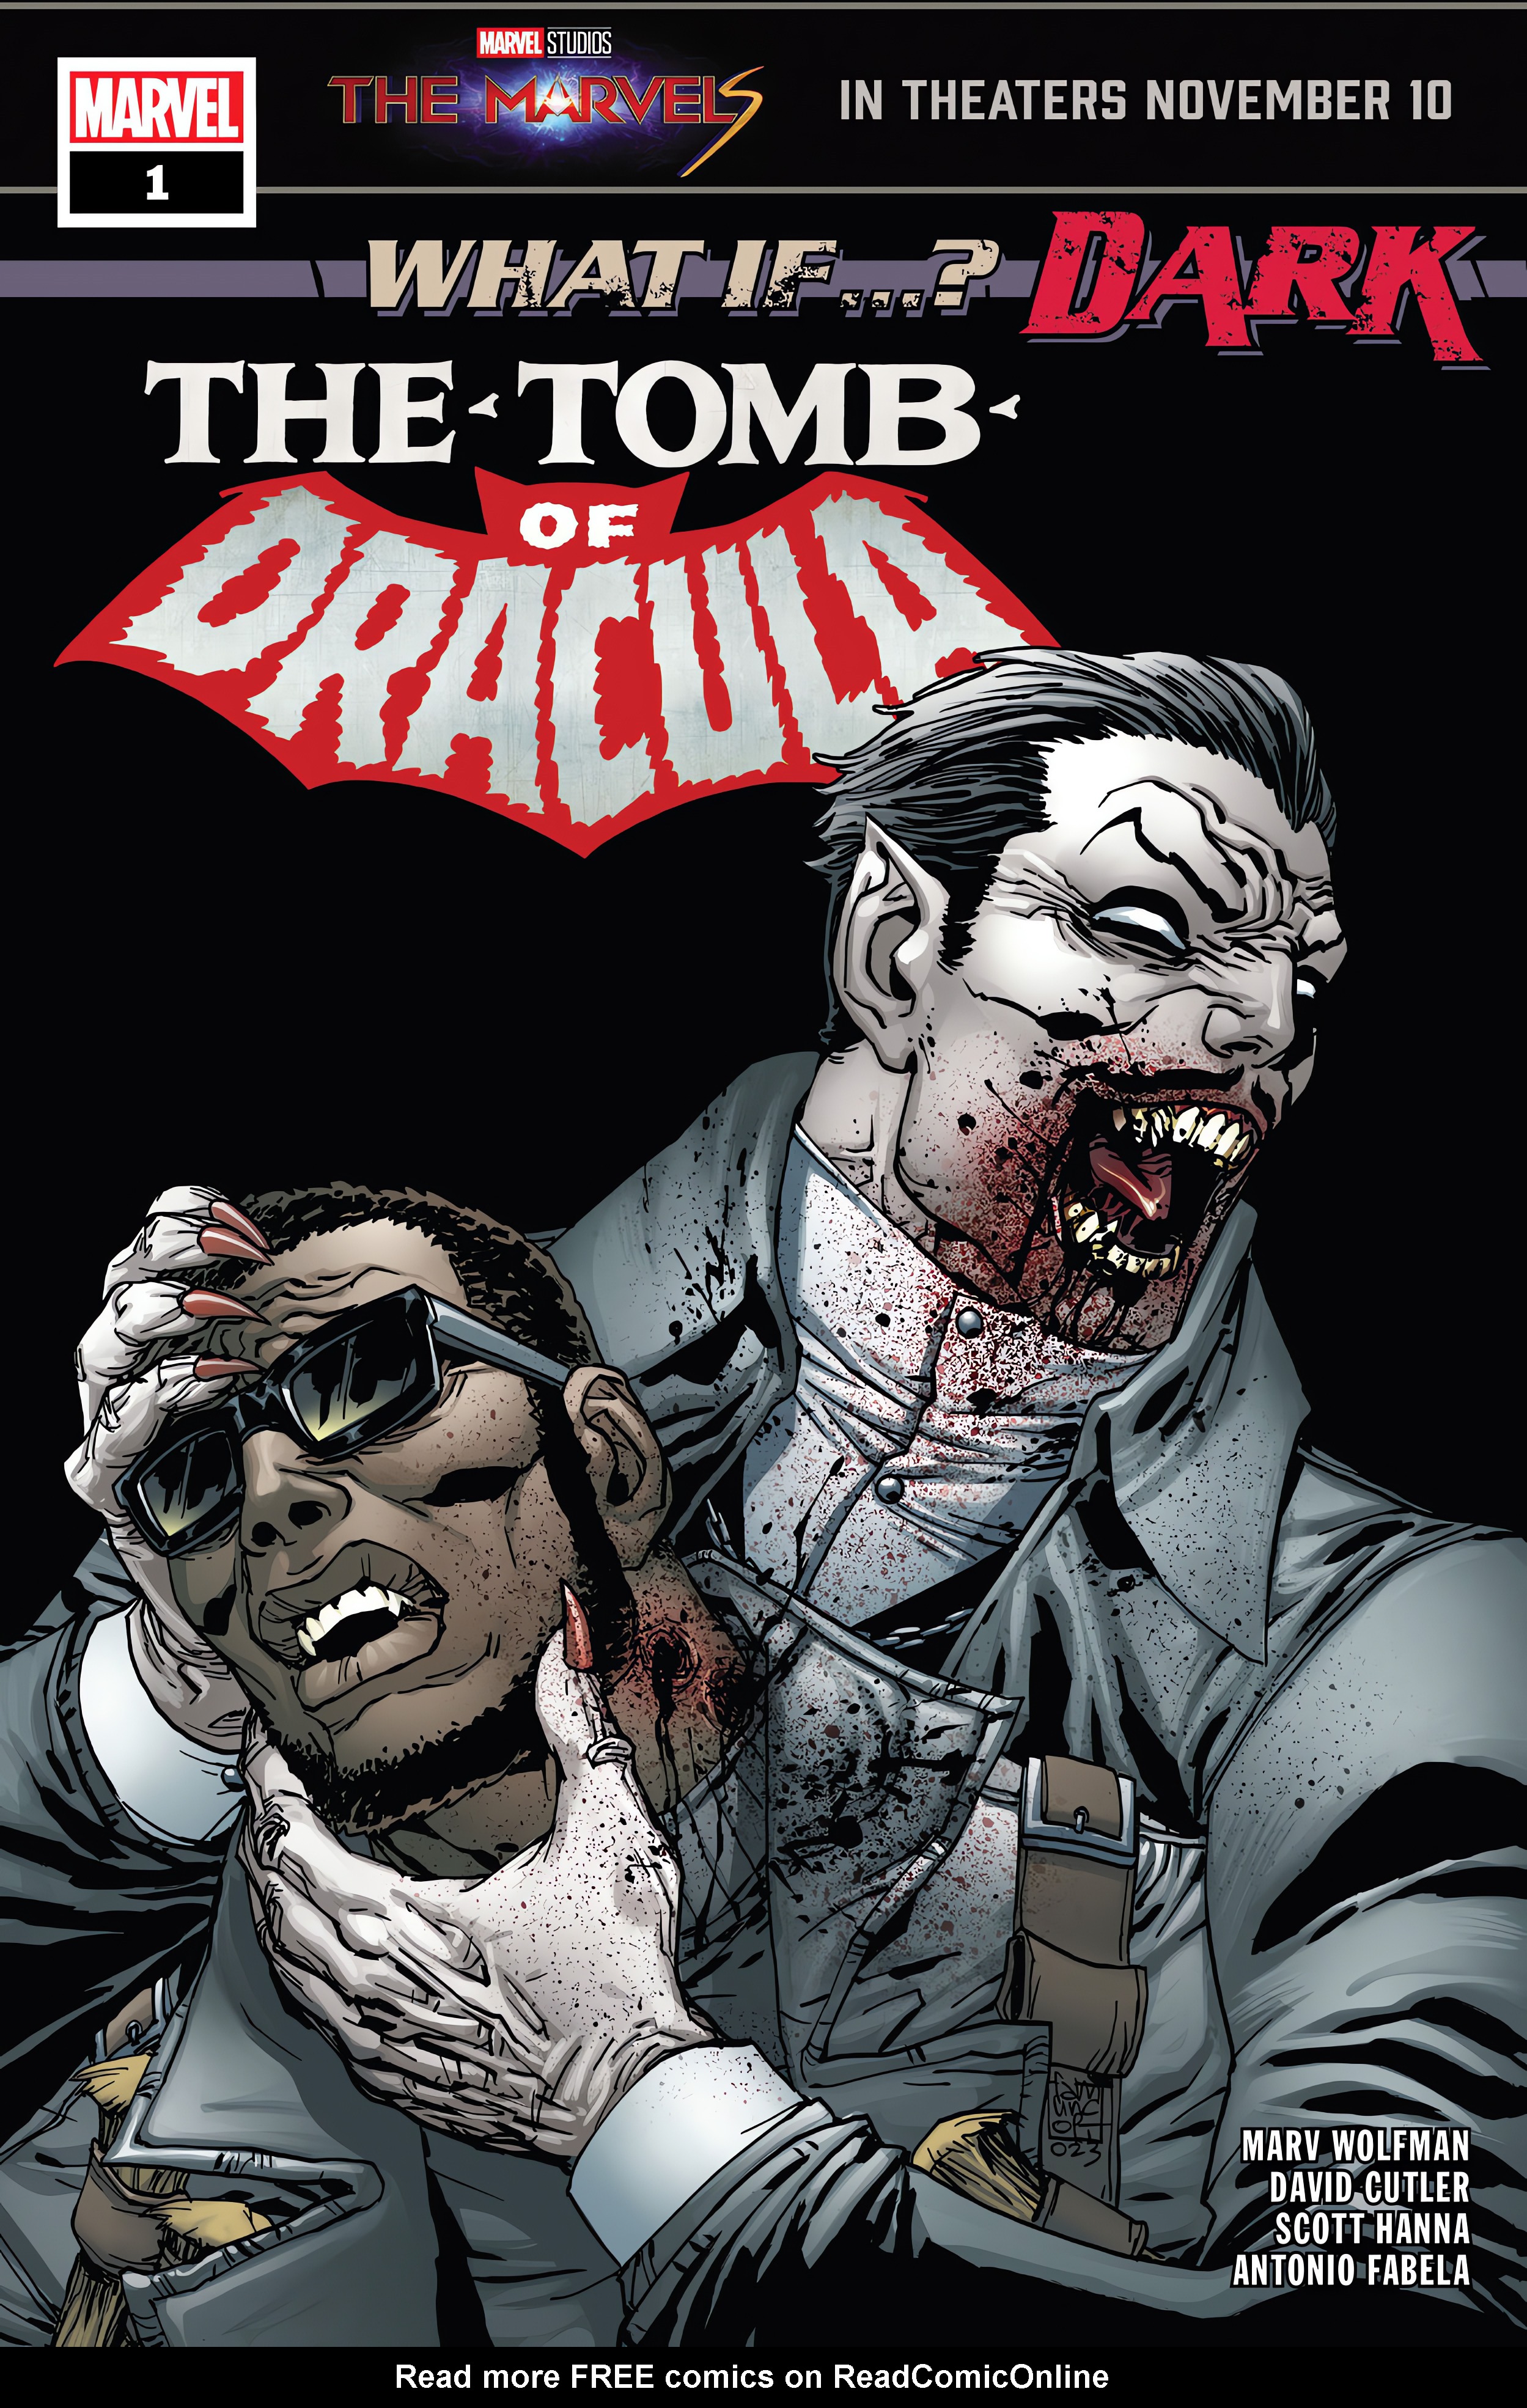 Read online What If...? Dark: Tomb of Dracula comic -  Issue # Full - 1